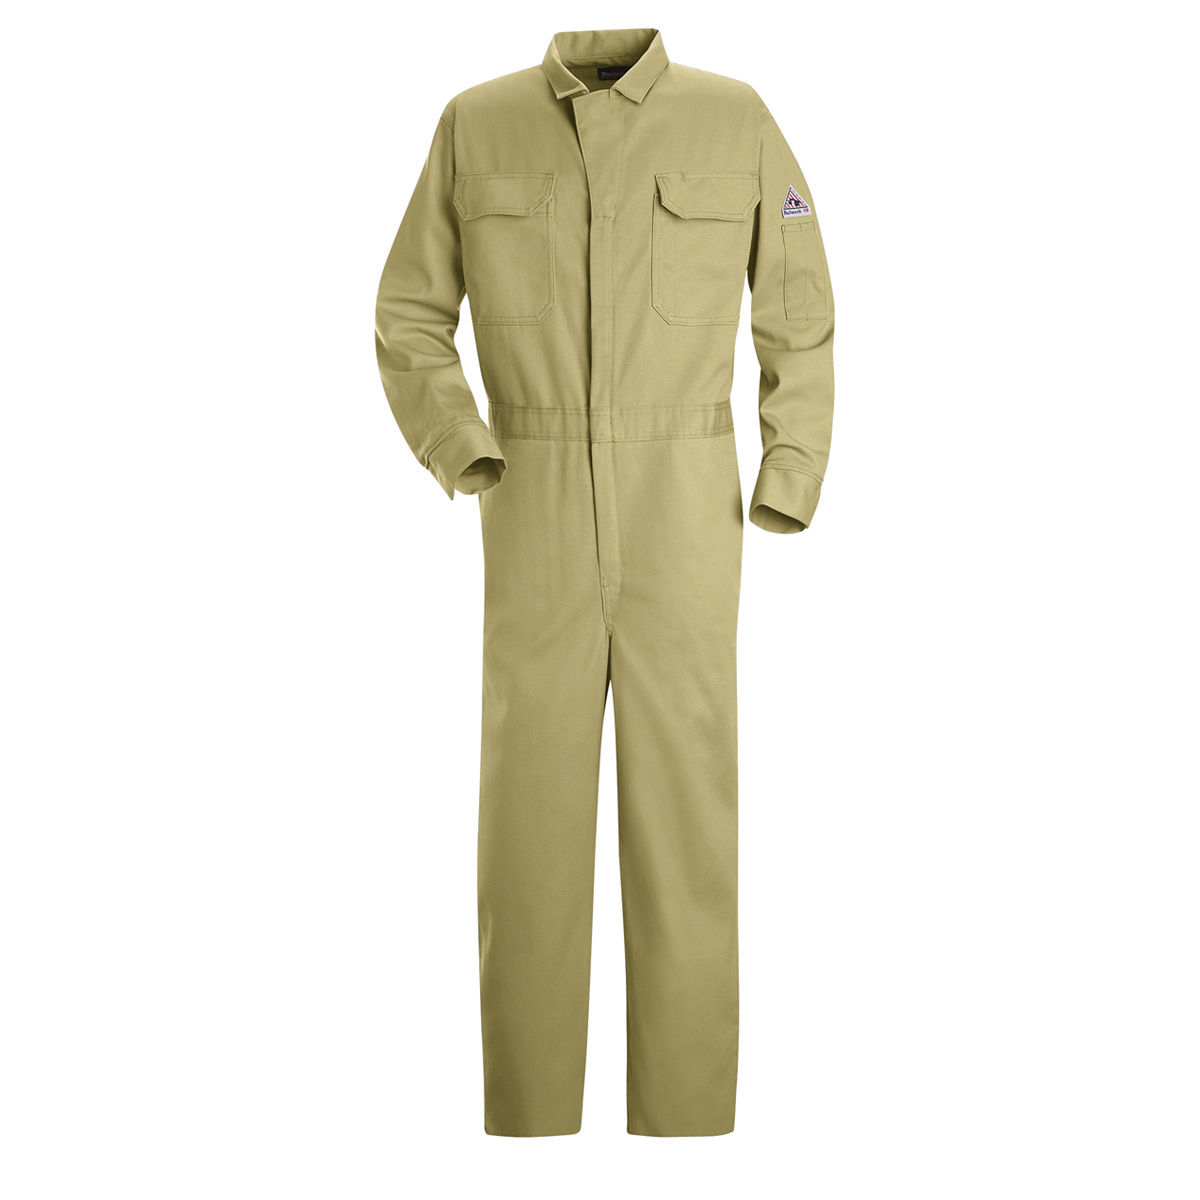 Bulwark® 54 Tall Khaki EXCEL FR® Twill Cotton Flame Resistant Coveralls With Zipper Front Closure